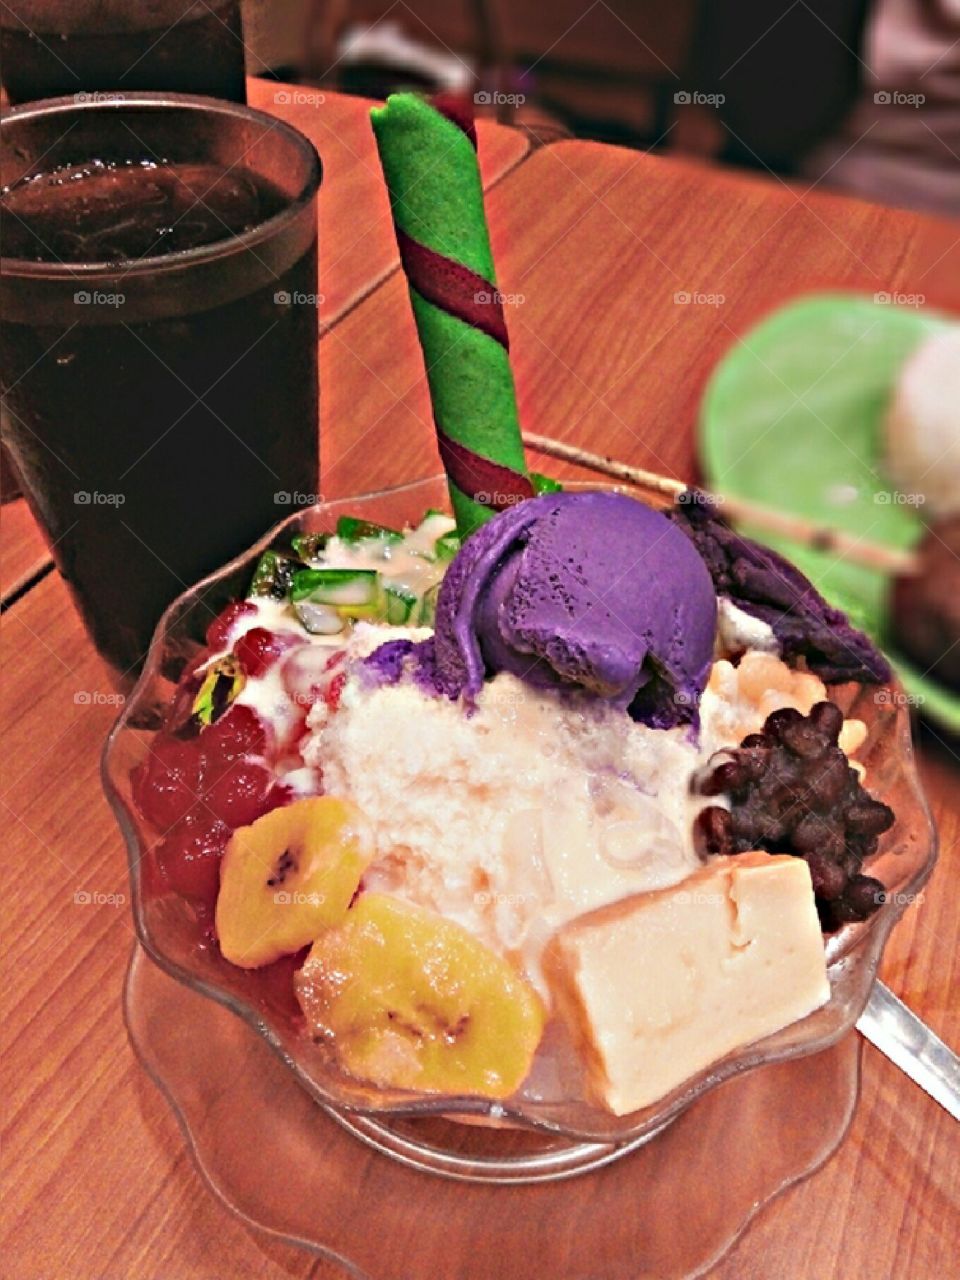 Haluhalo or Halo-halo is a popular Filipino dessert with a mixture of shaved ice and evaporated milk to which various ingredients are added, including boiled sweet beans, coconut, sago, gulaman, tubers, fruits, and yam ice cream.